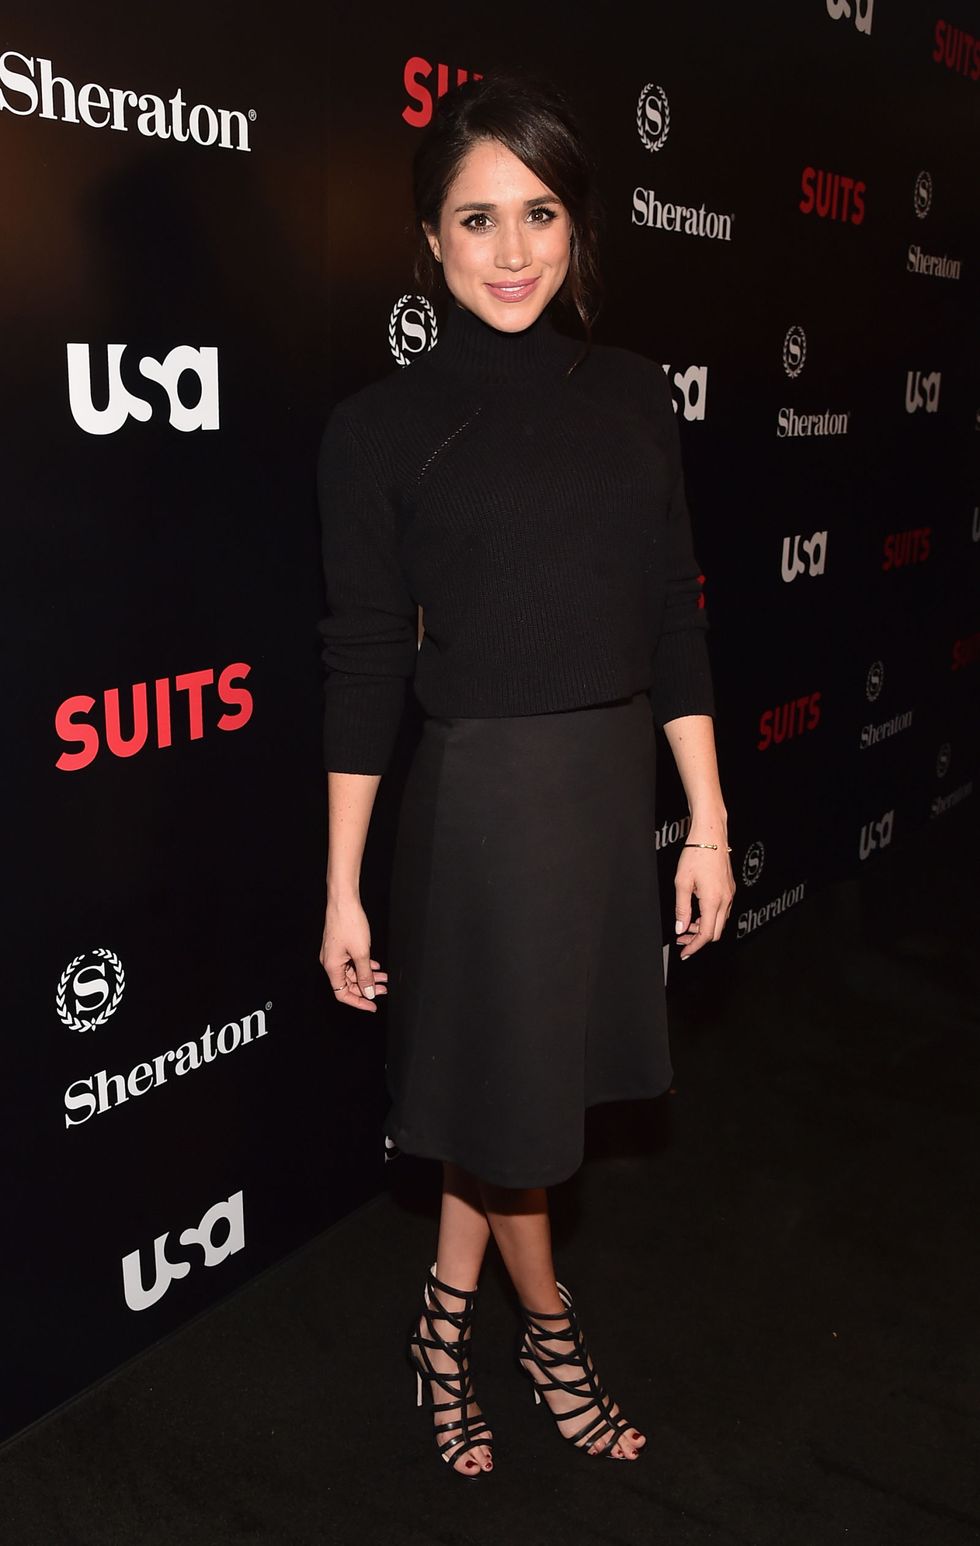 LOS ANGELES, CA - JANUARY 21:  Actress Meghan Markle attends the premiere of USA Network's "Suits" Season 5 at the Sheraton Los Angeles Downtown Hotel on January 21, 2016 in Los Angeles, California.  (Photo by Alberto E. Rodriguez/Getty Images)